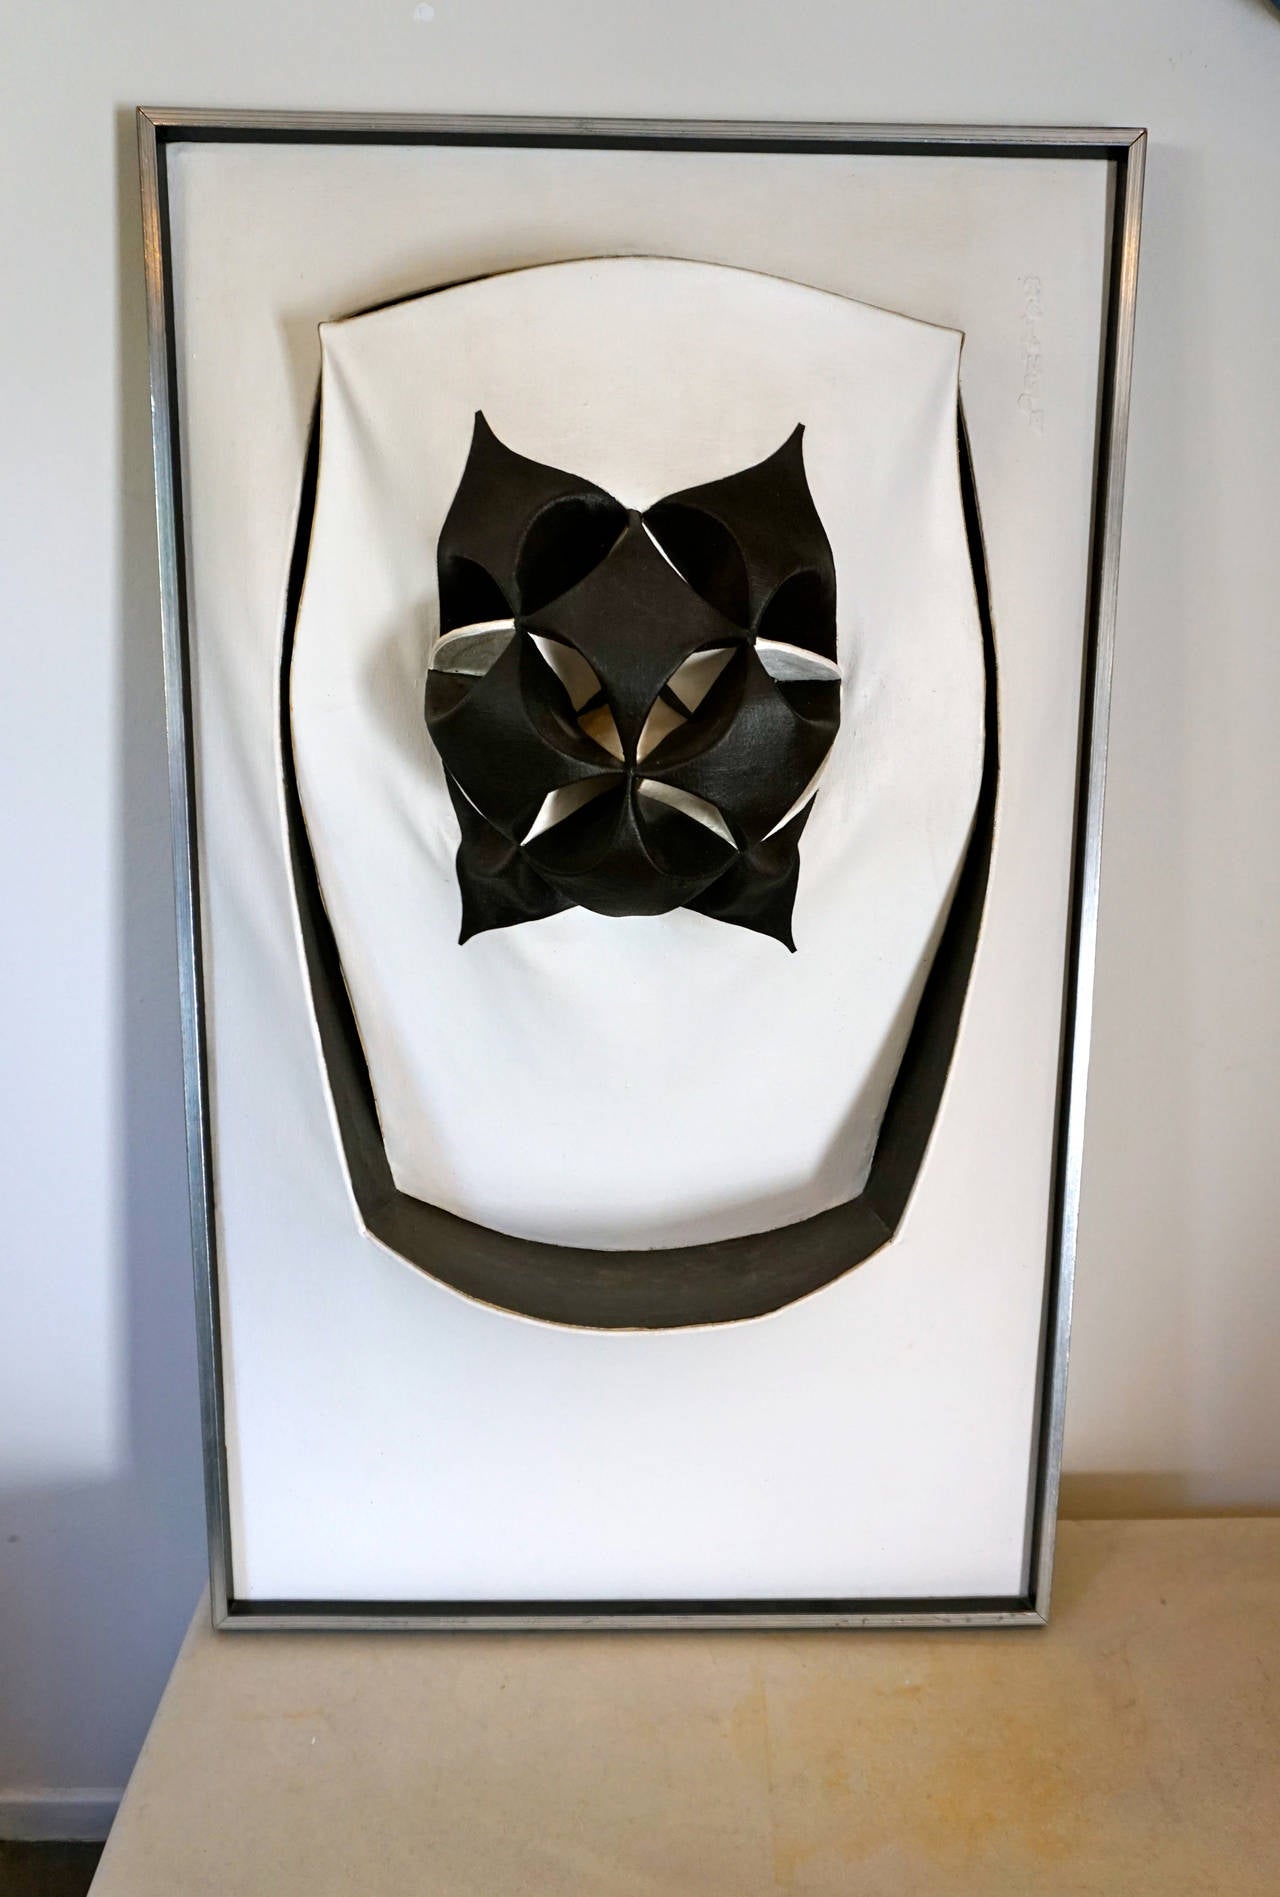 Black and white three-dimensional painting titled "Oracle". Signed "Zellinger" in relief and dated 1976 from the visual arts exhibit in Ontario, Canada.